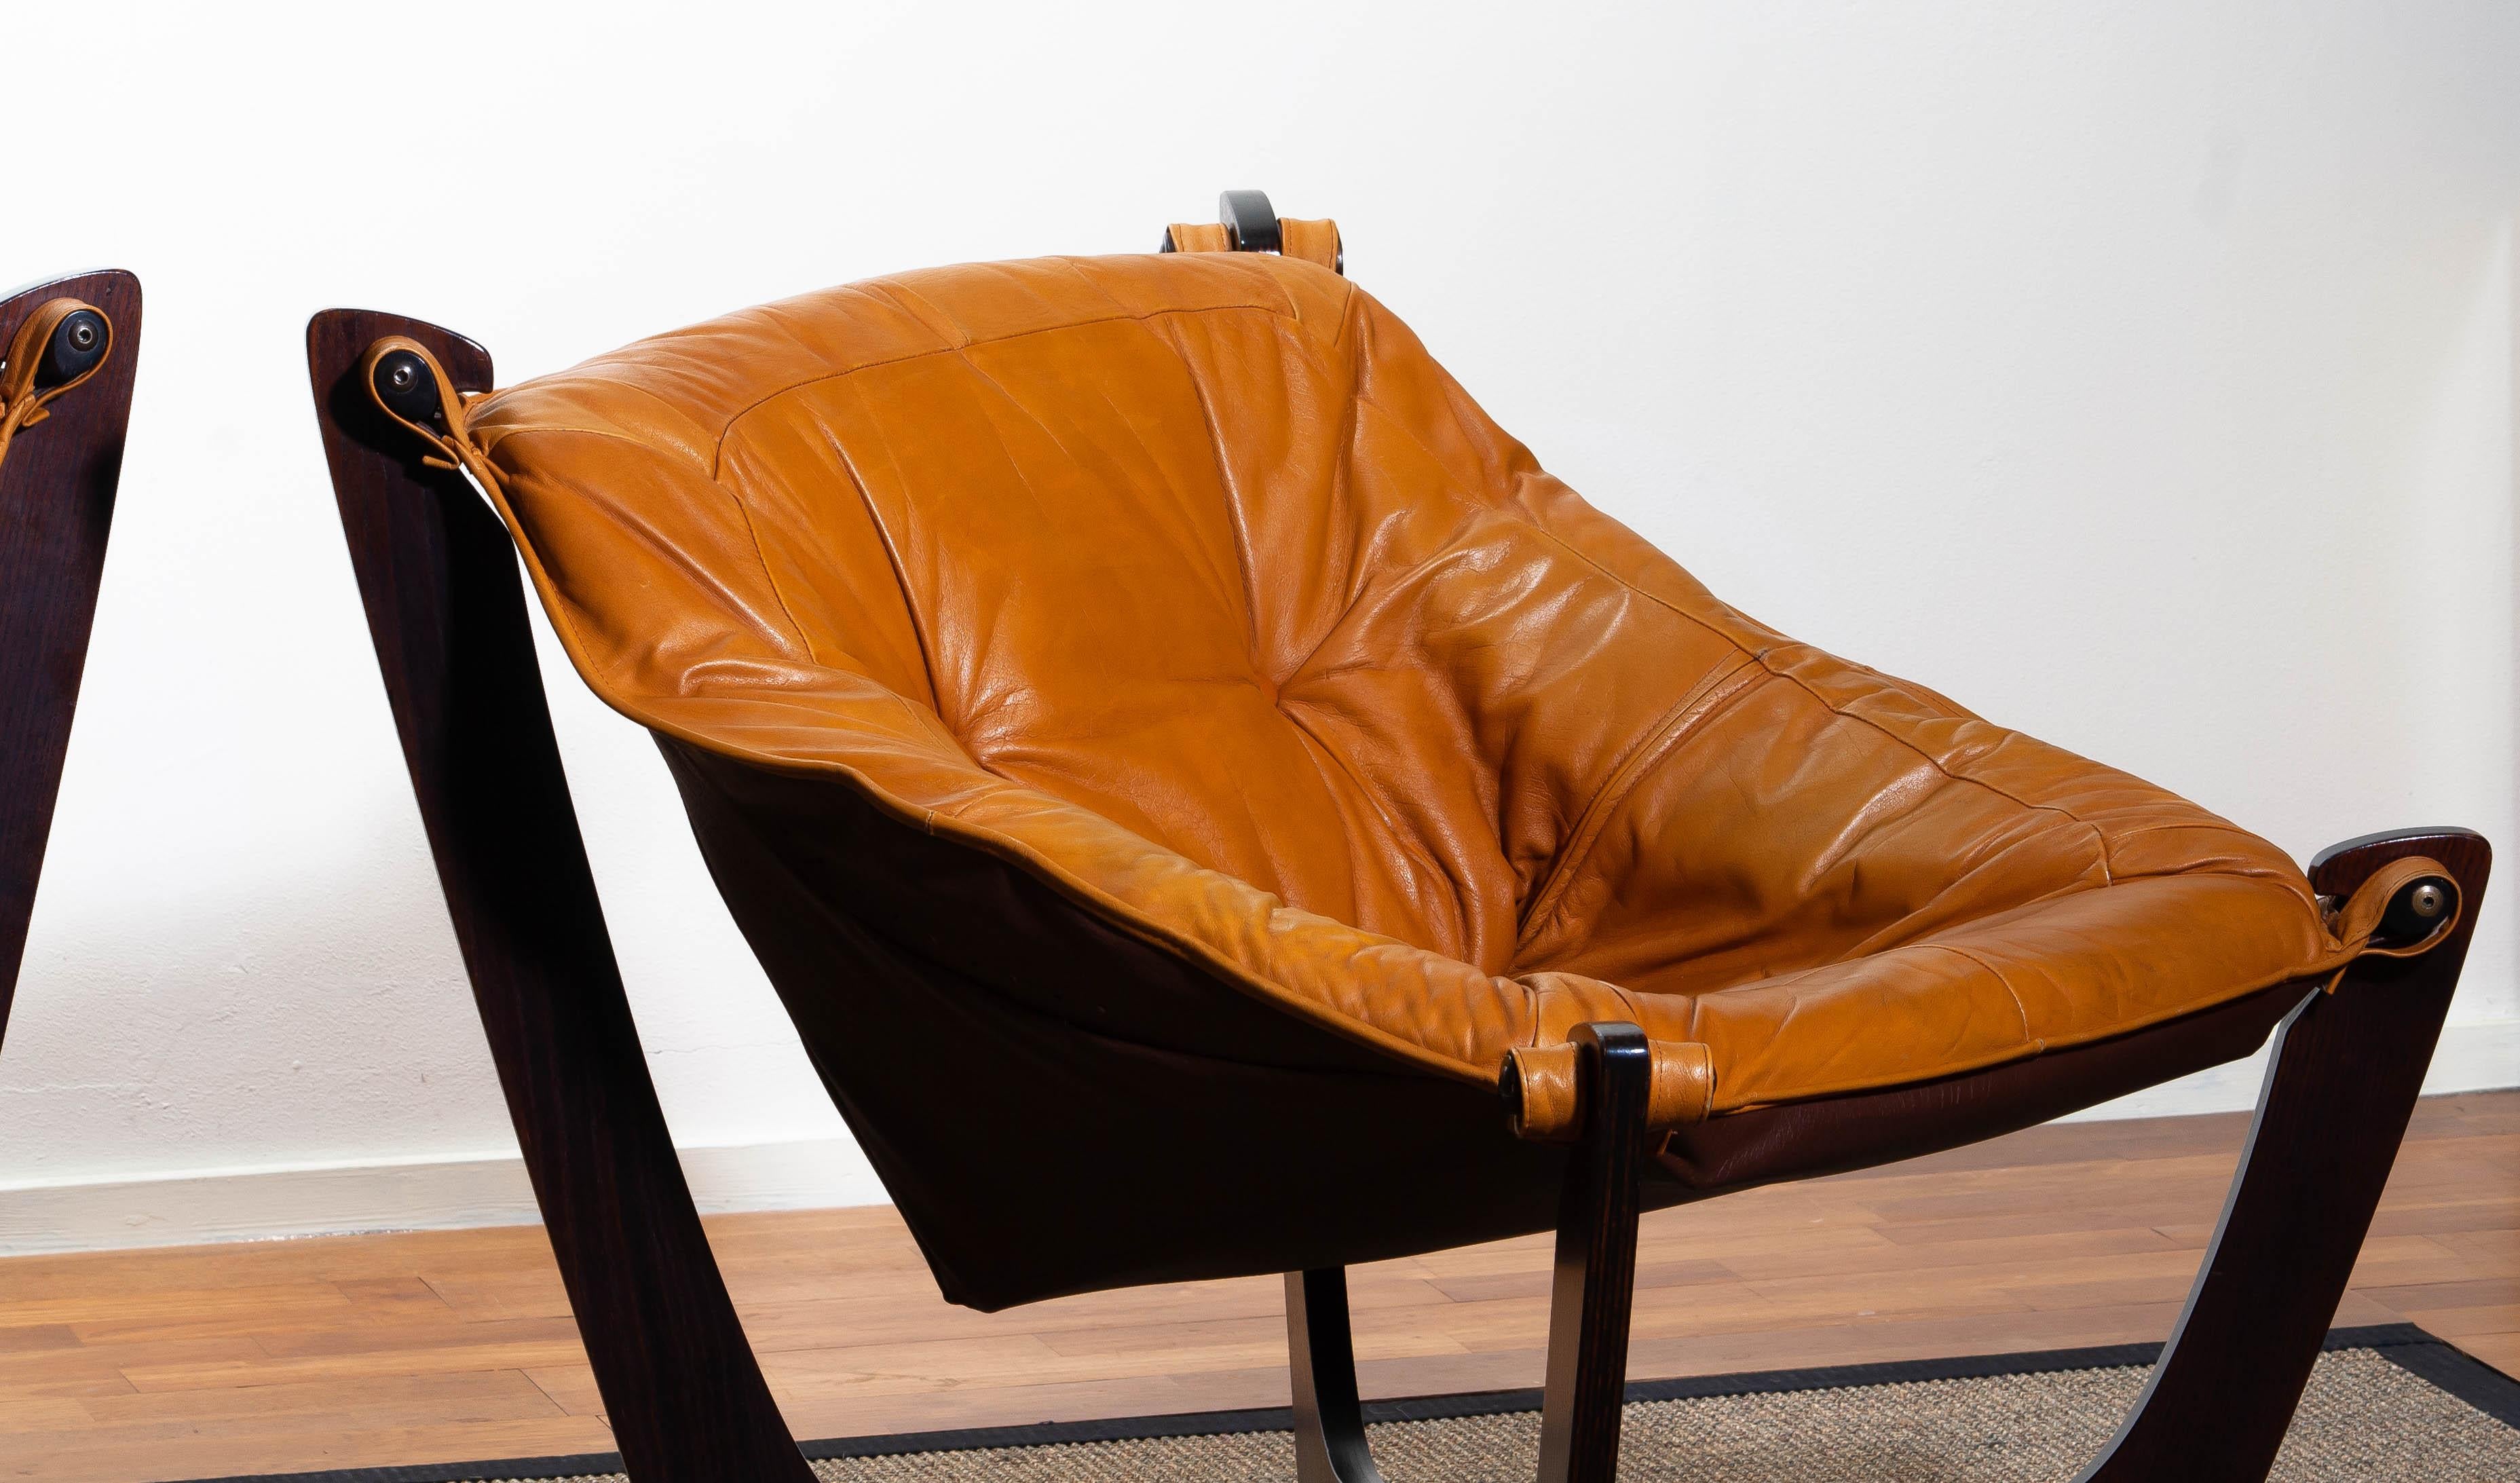 1970 Pair of Leather Lounge Chairs by Odd Knutsen for Hjellegjerde Møbler Norway 4